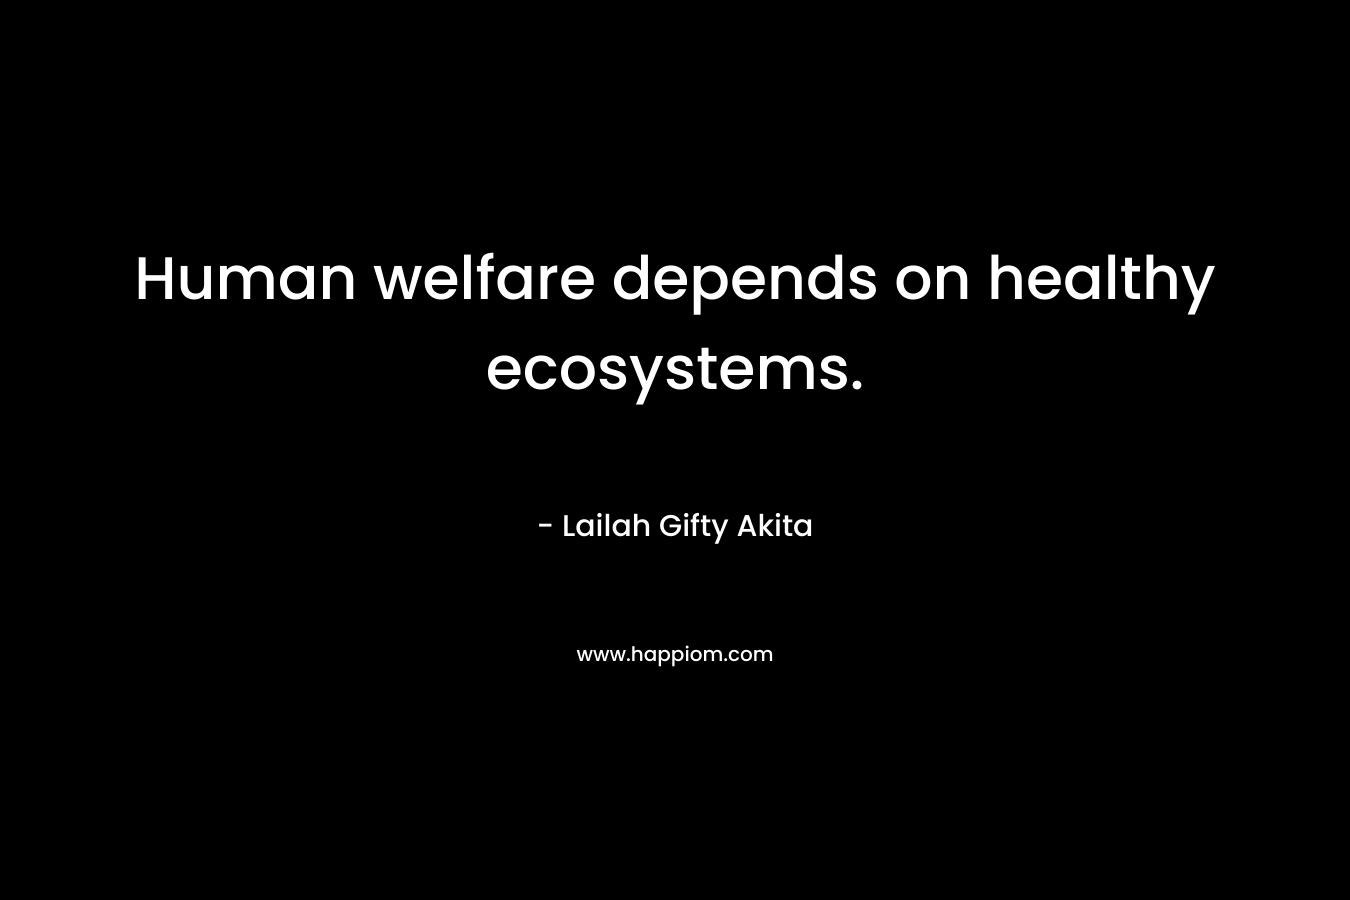 Human welfare depends on healthy ecosystems.